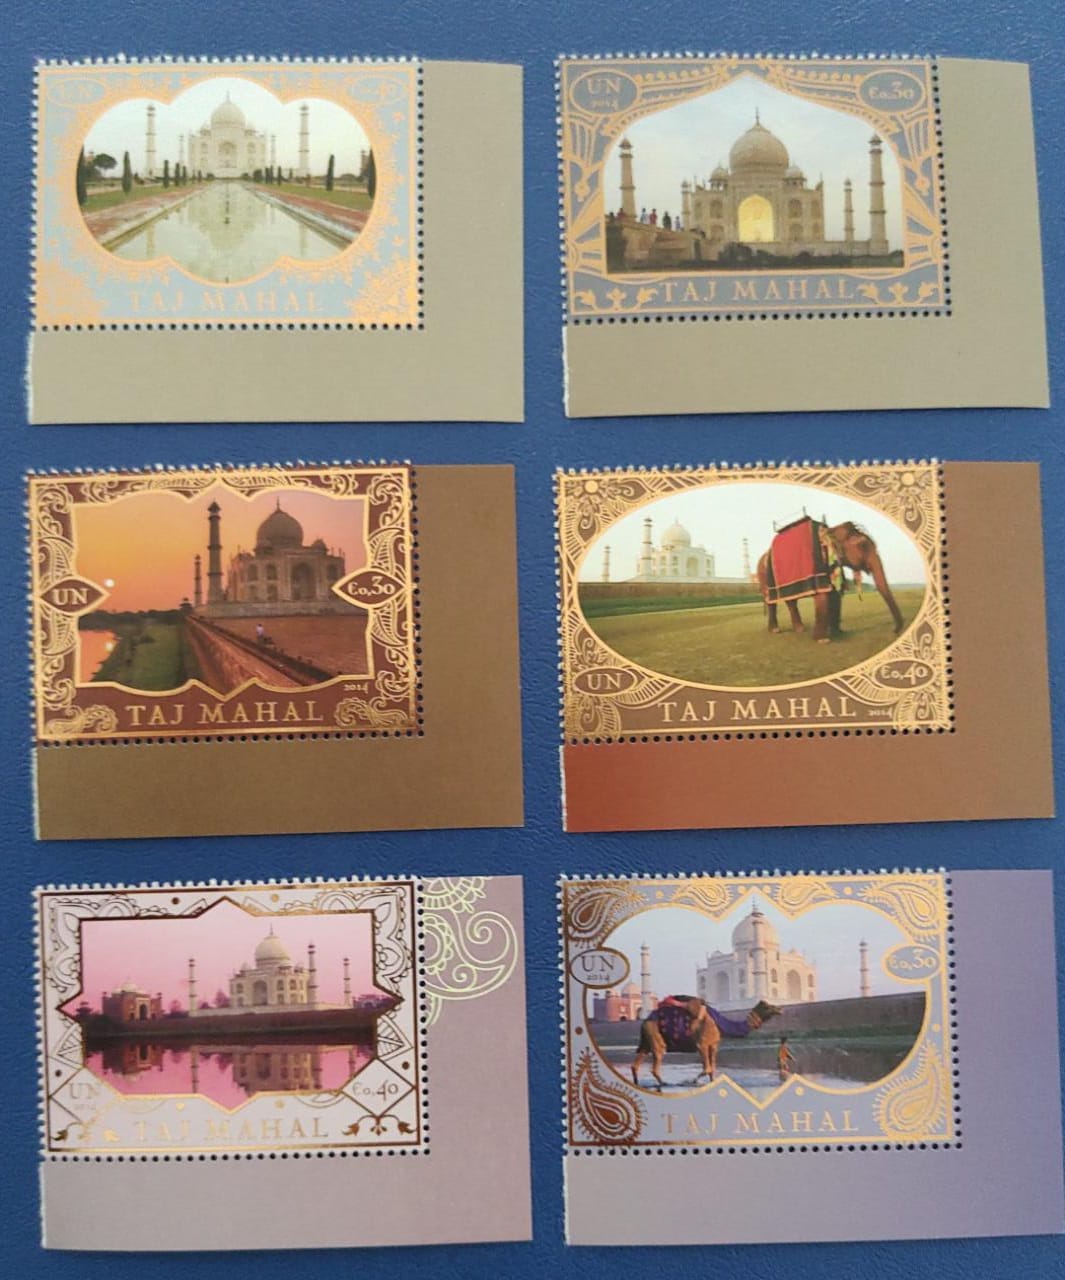 UN 2014 issued six beautiful metalic foiled stamps on Taj Mahal - all stamps have a hidden image- logo of United Nations - visible at a particular angle with naked eye.